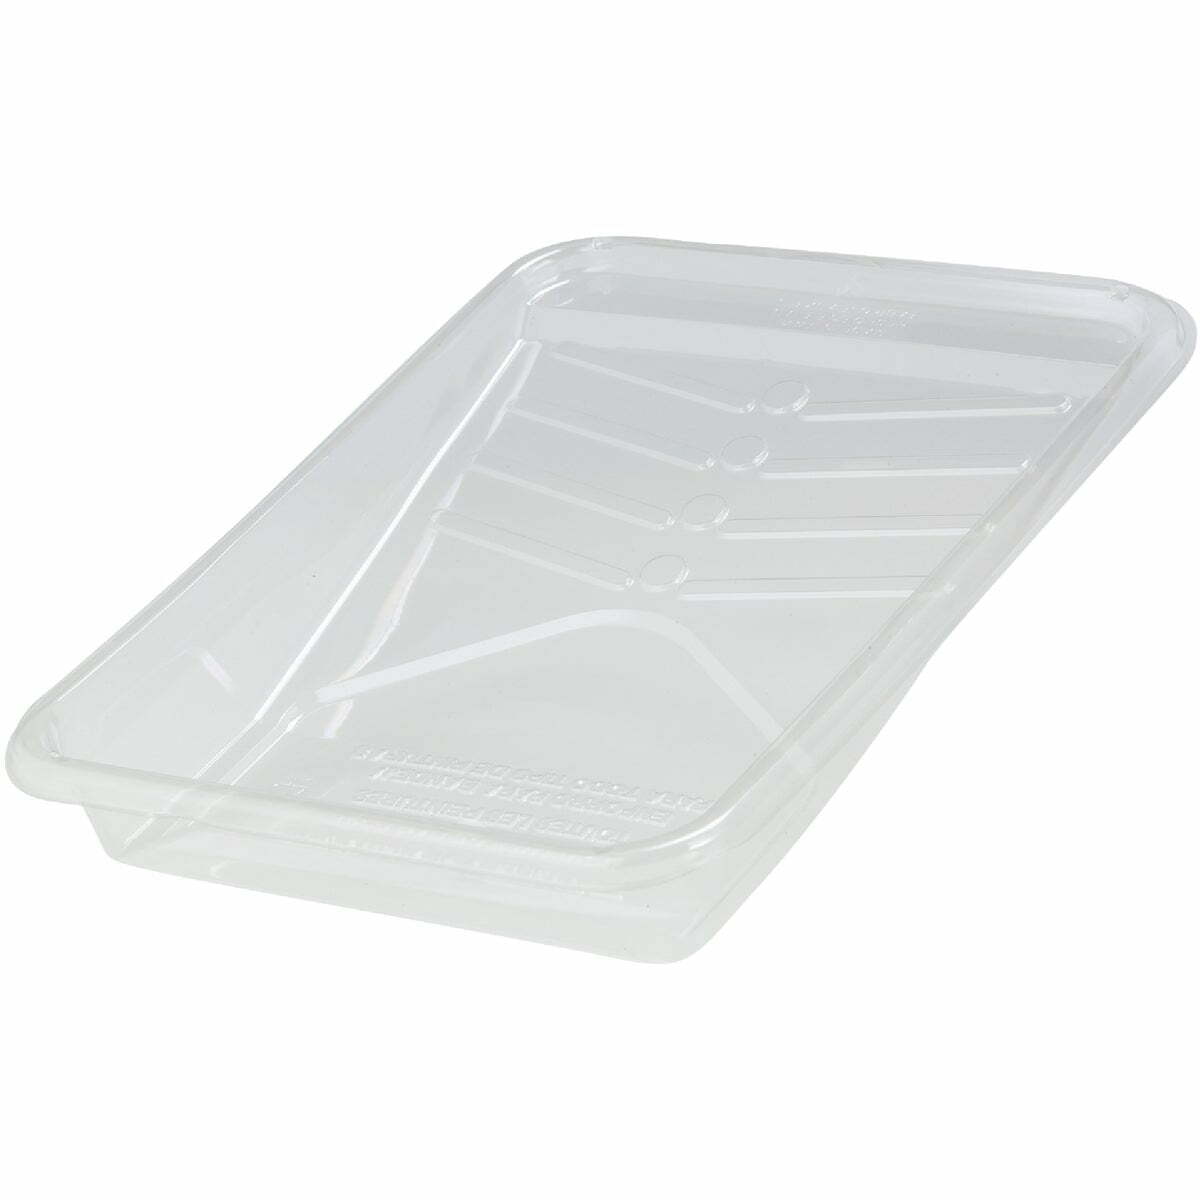 Paint Tray Liner 10 Pack - MacDonald Industrial Supply